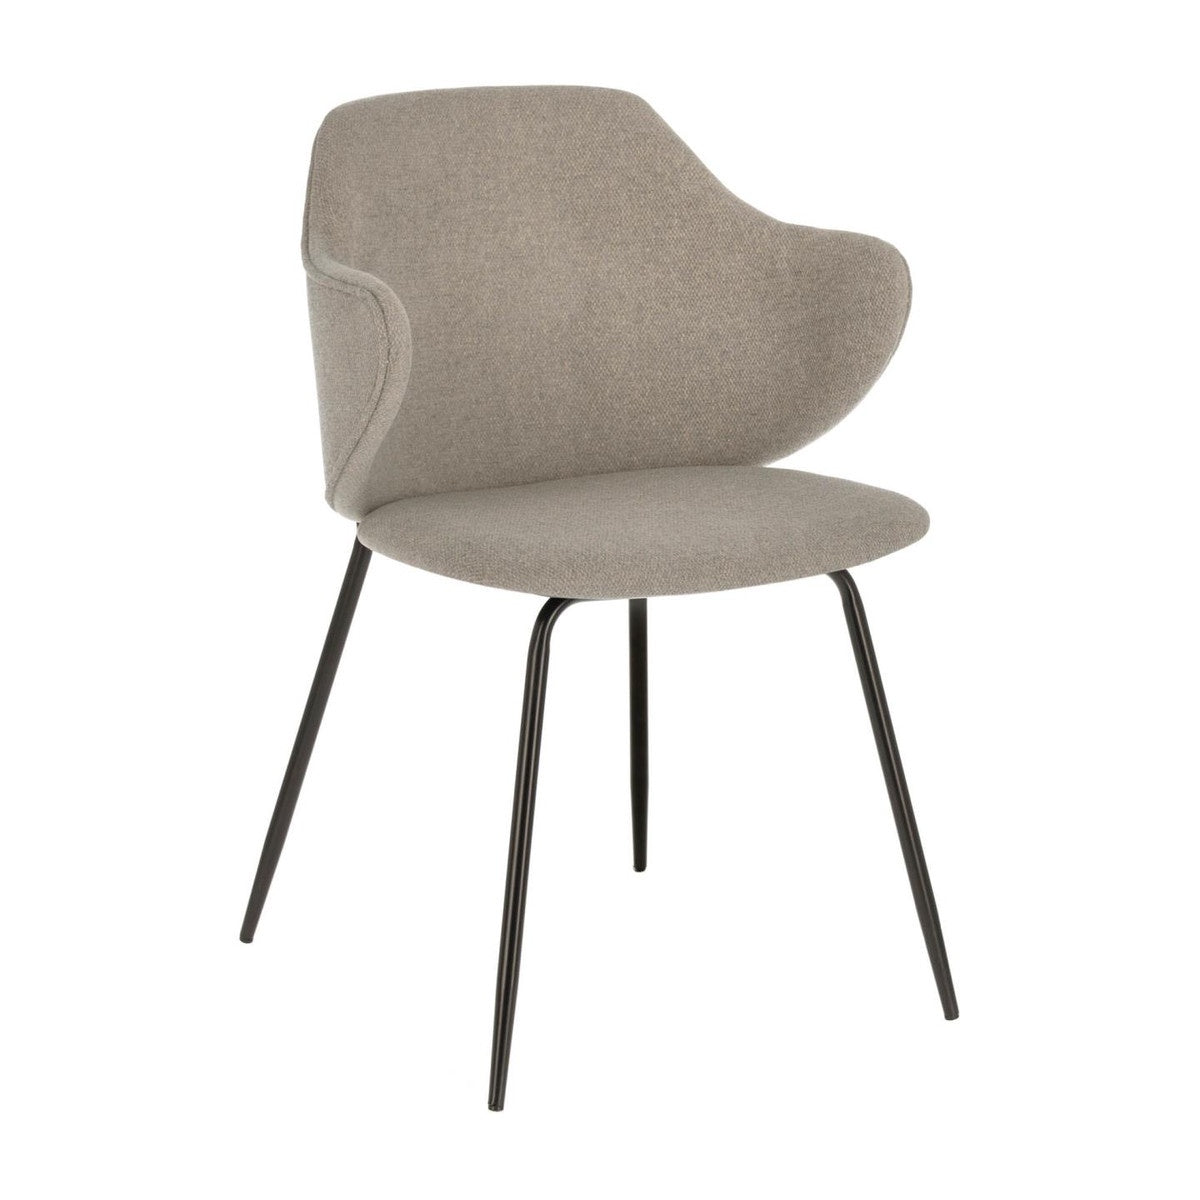 Suanne dining chair